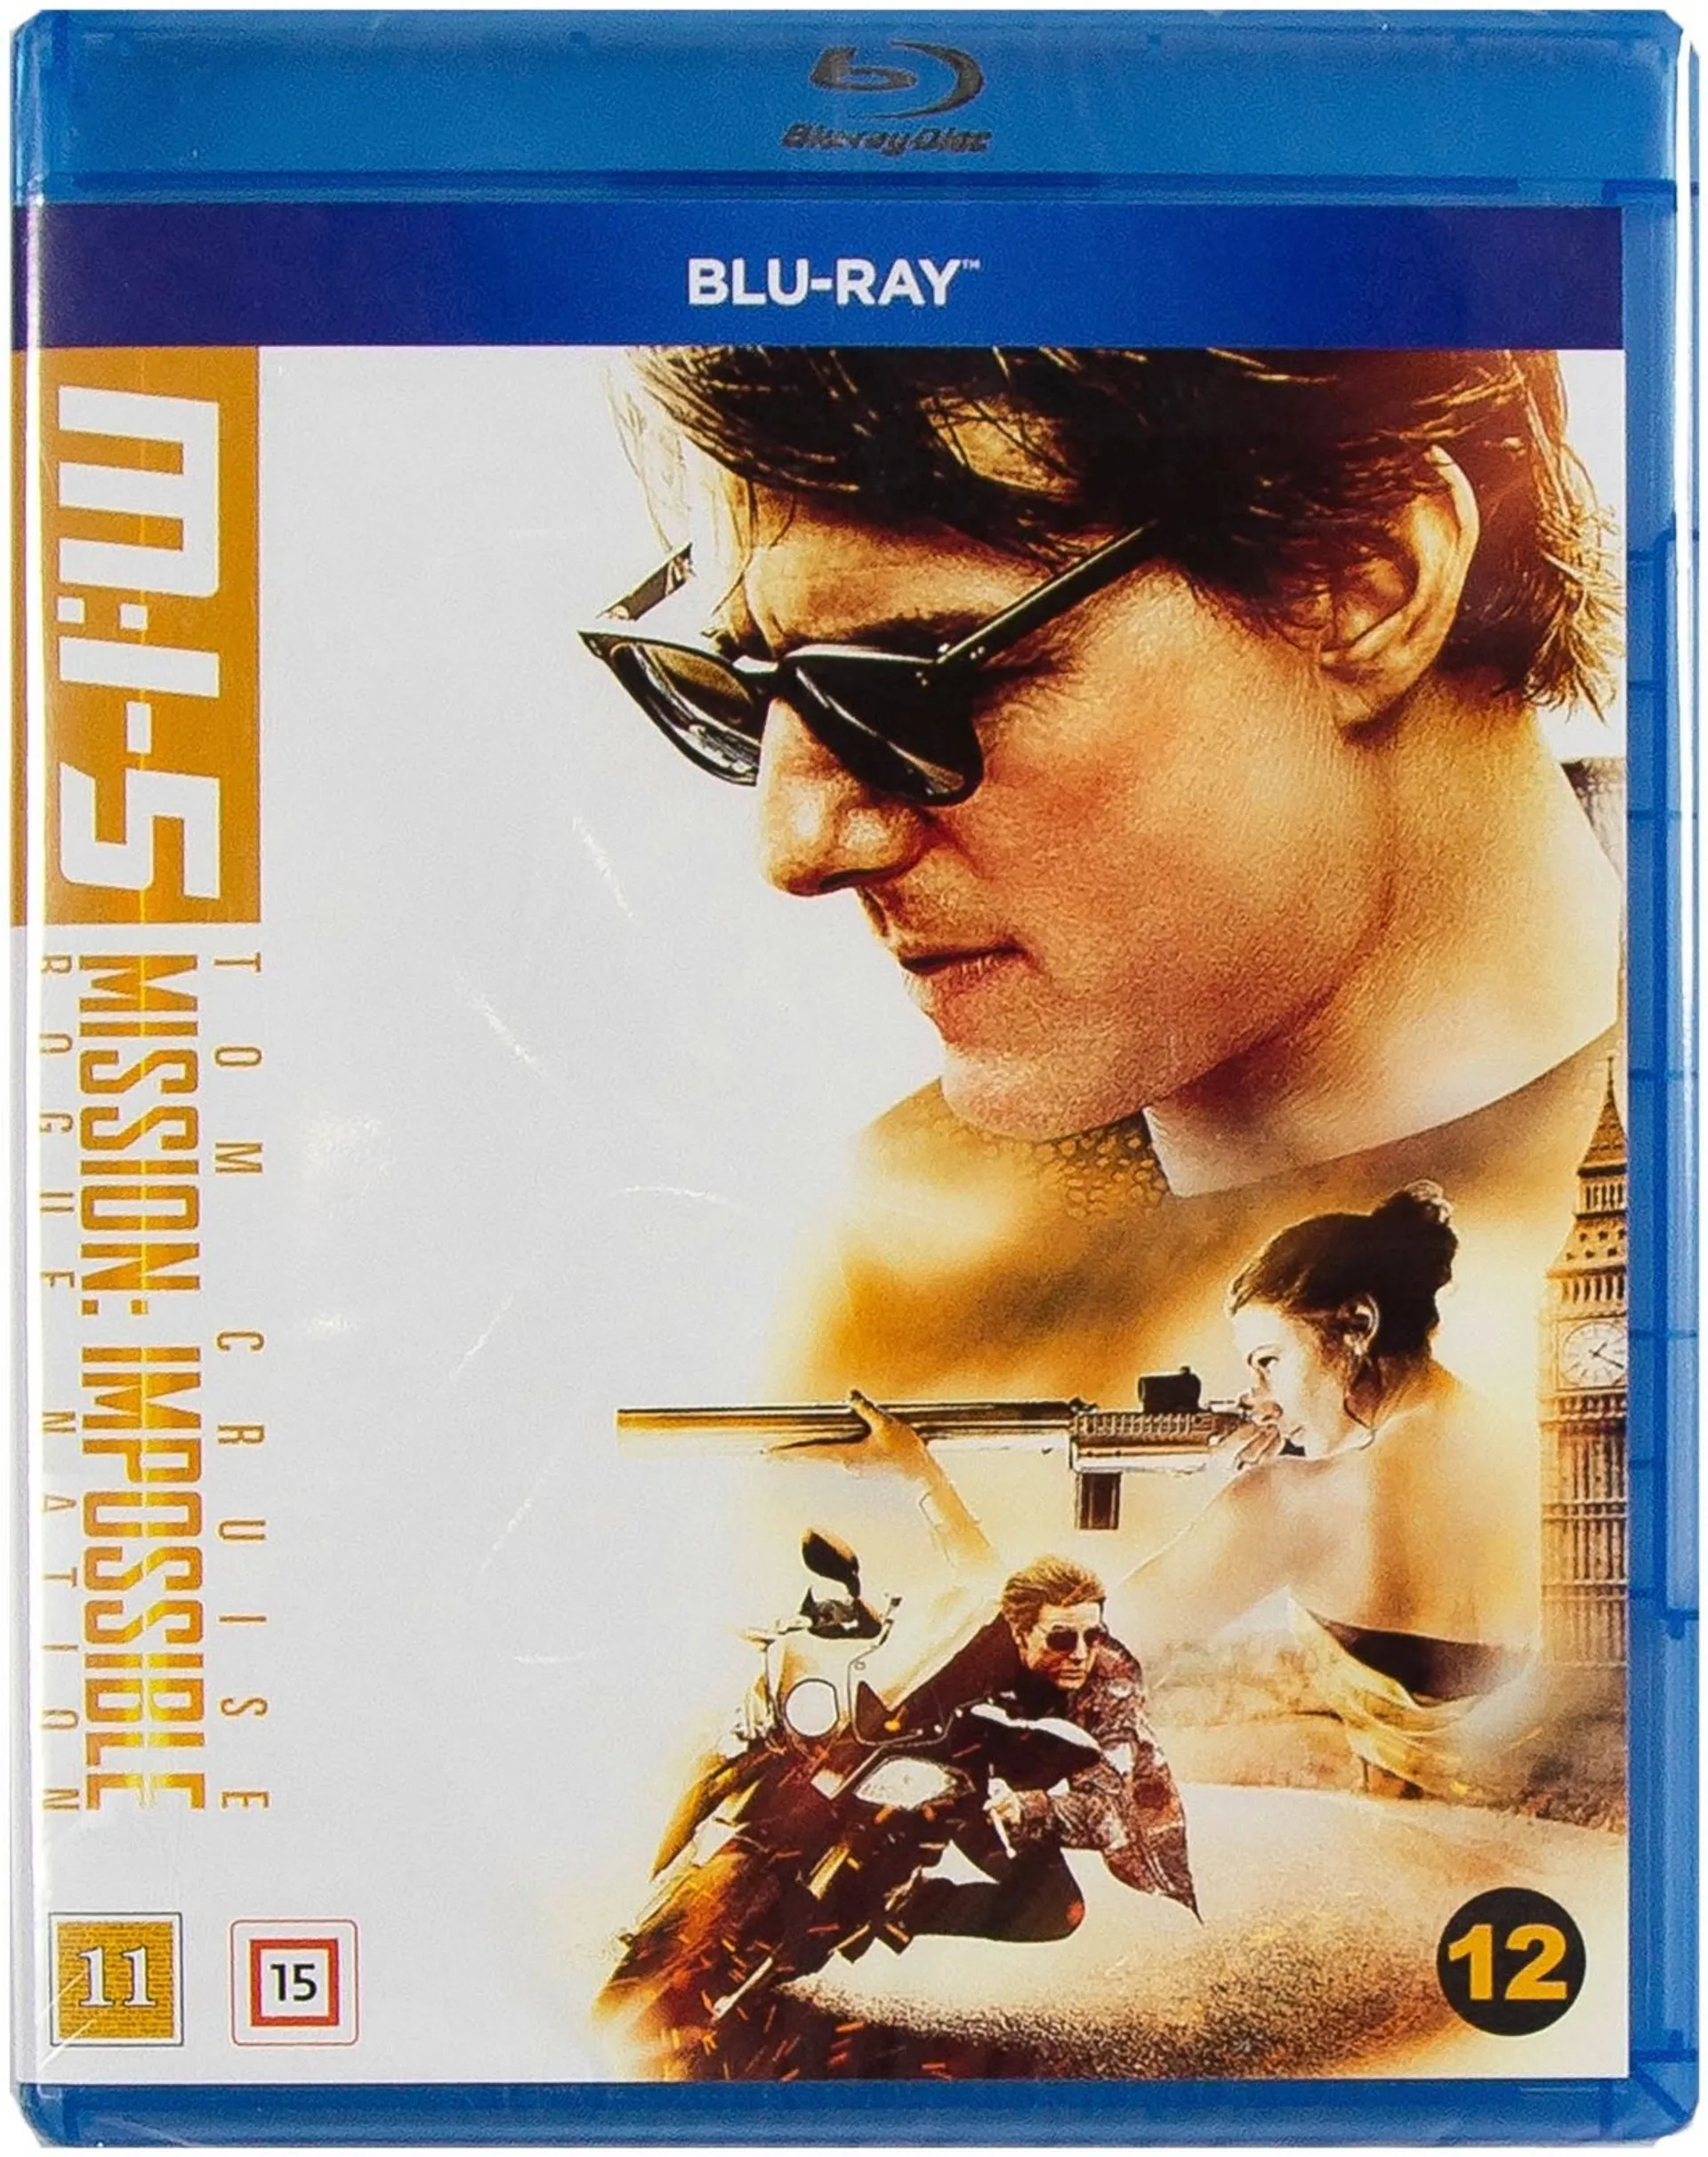 Mission Impossible 5 Blu-ray